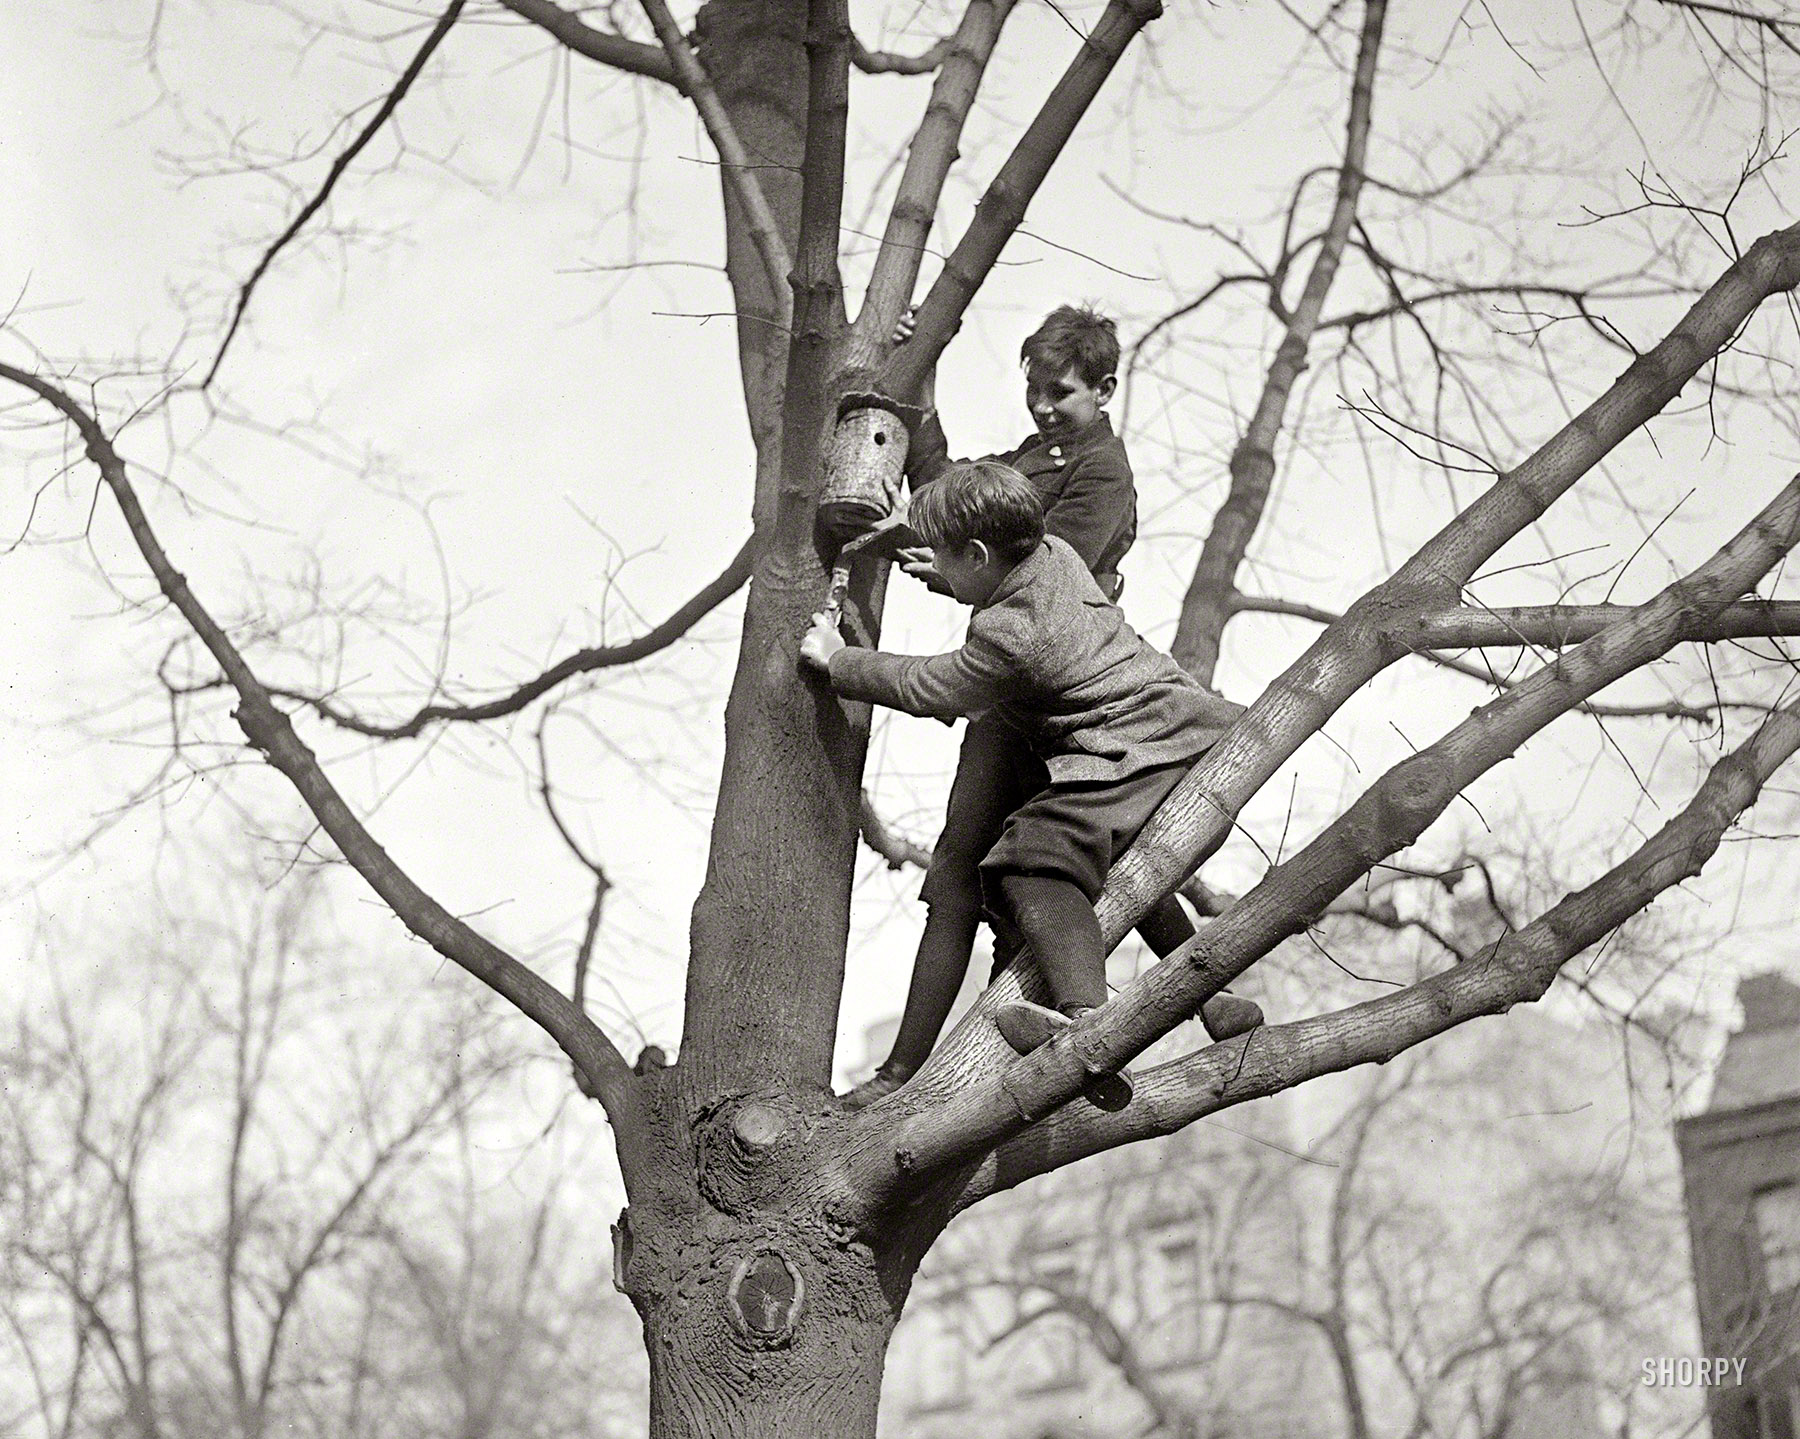 January 20, 1921. Washington, D.C. "American Forestry Assn. bird house contest." National Photo Company Collection glass negative. View full size.